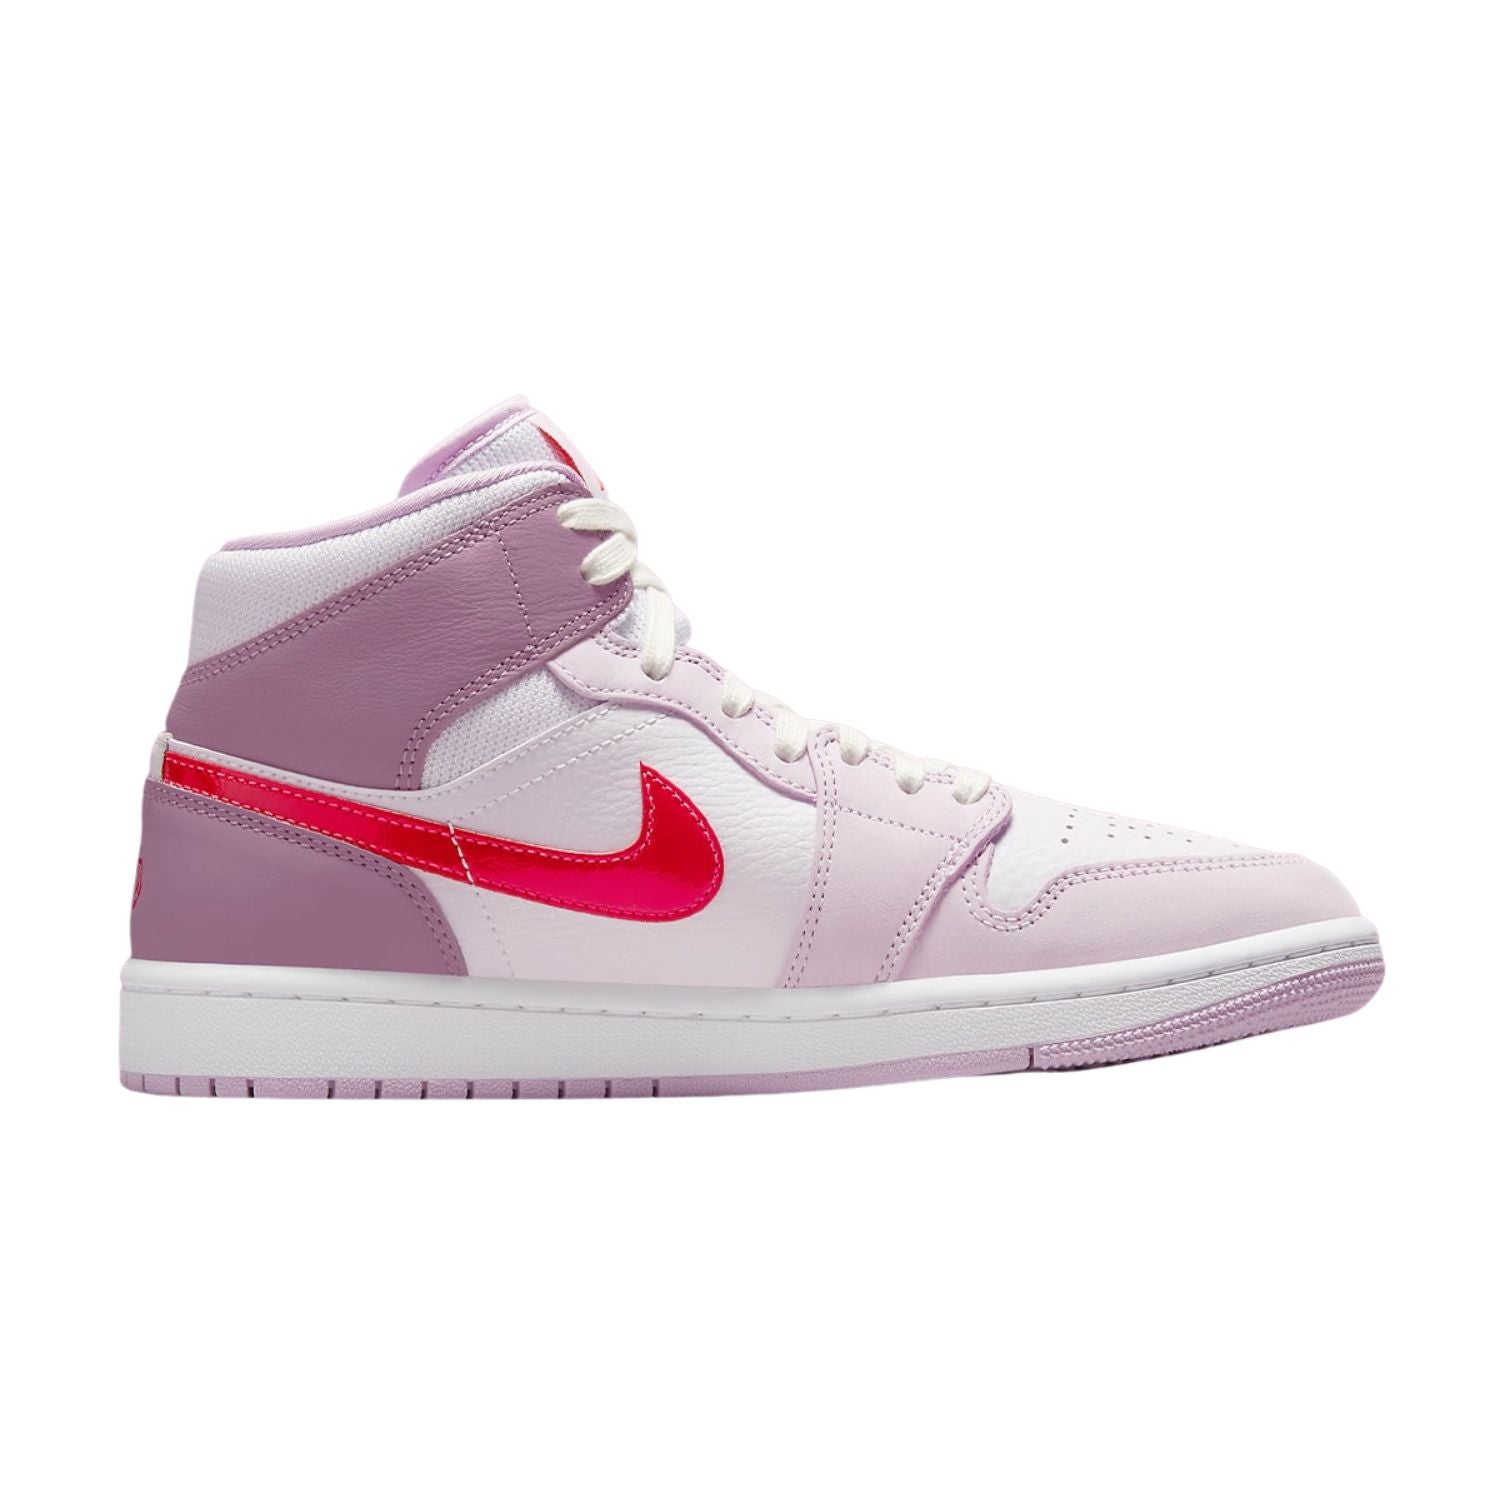 Nike 1 Mid Vd Womens Style : Dr0174-500